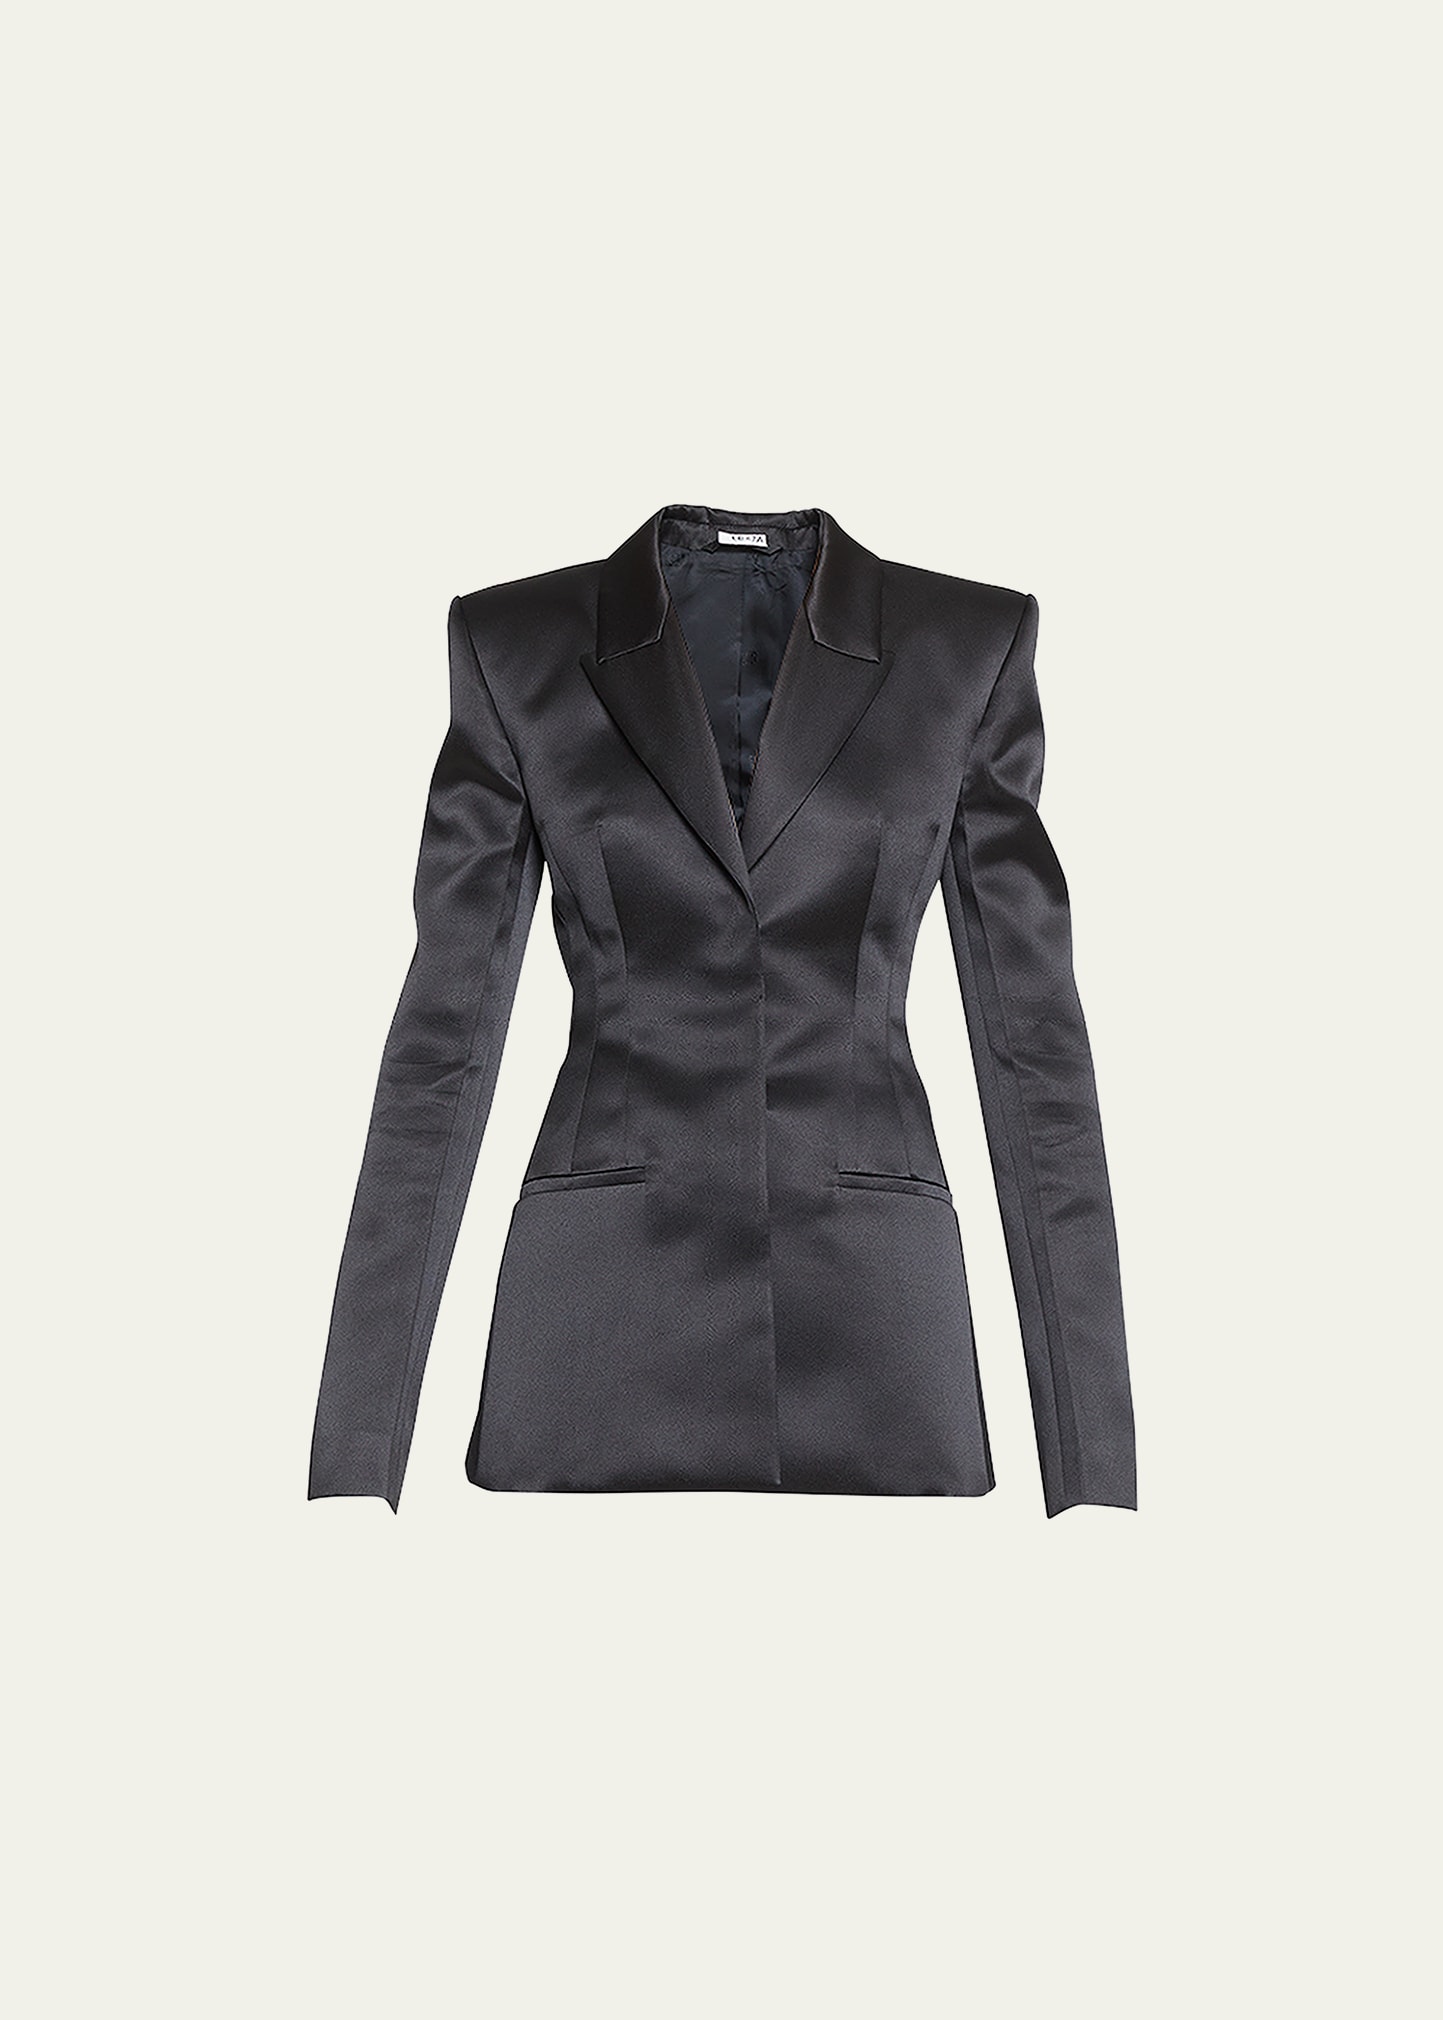 GIVENCHY SATIN SINGLE-BREASTED CINCHED BLAZER